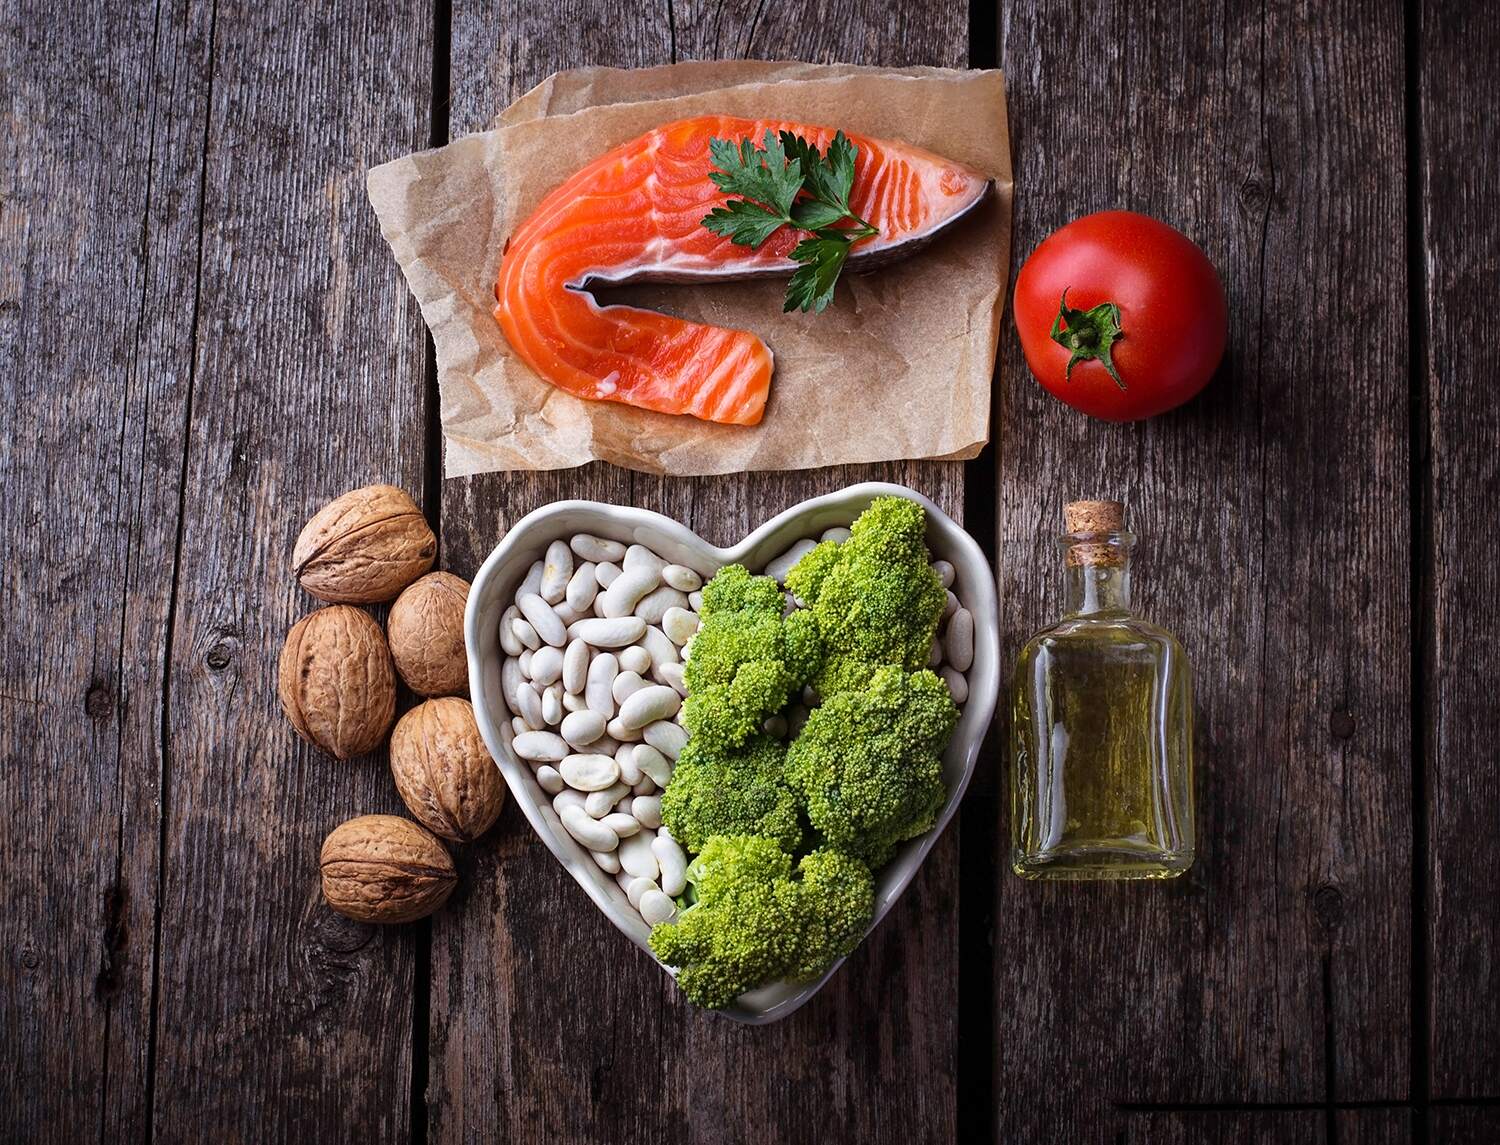 Top 5 Diets For Heart Disease According to A Dietitian